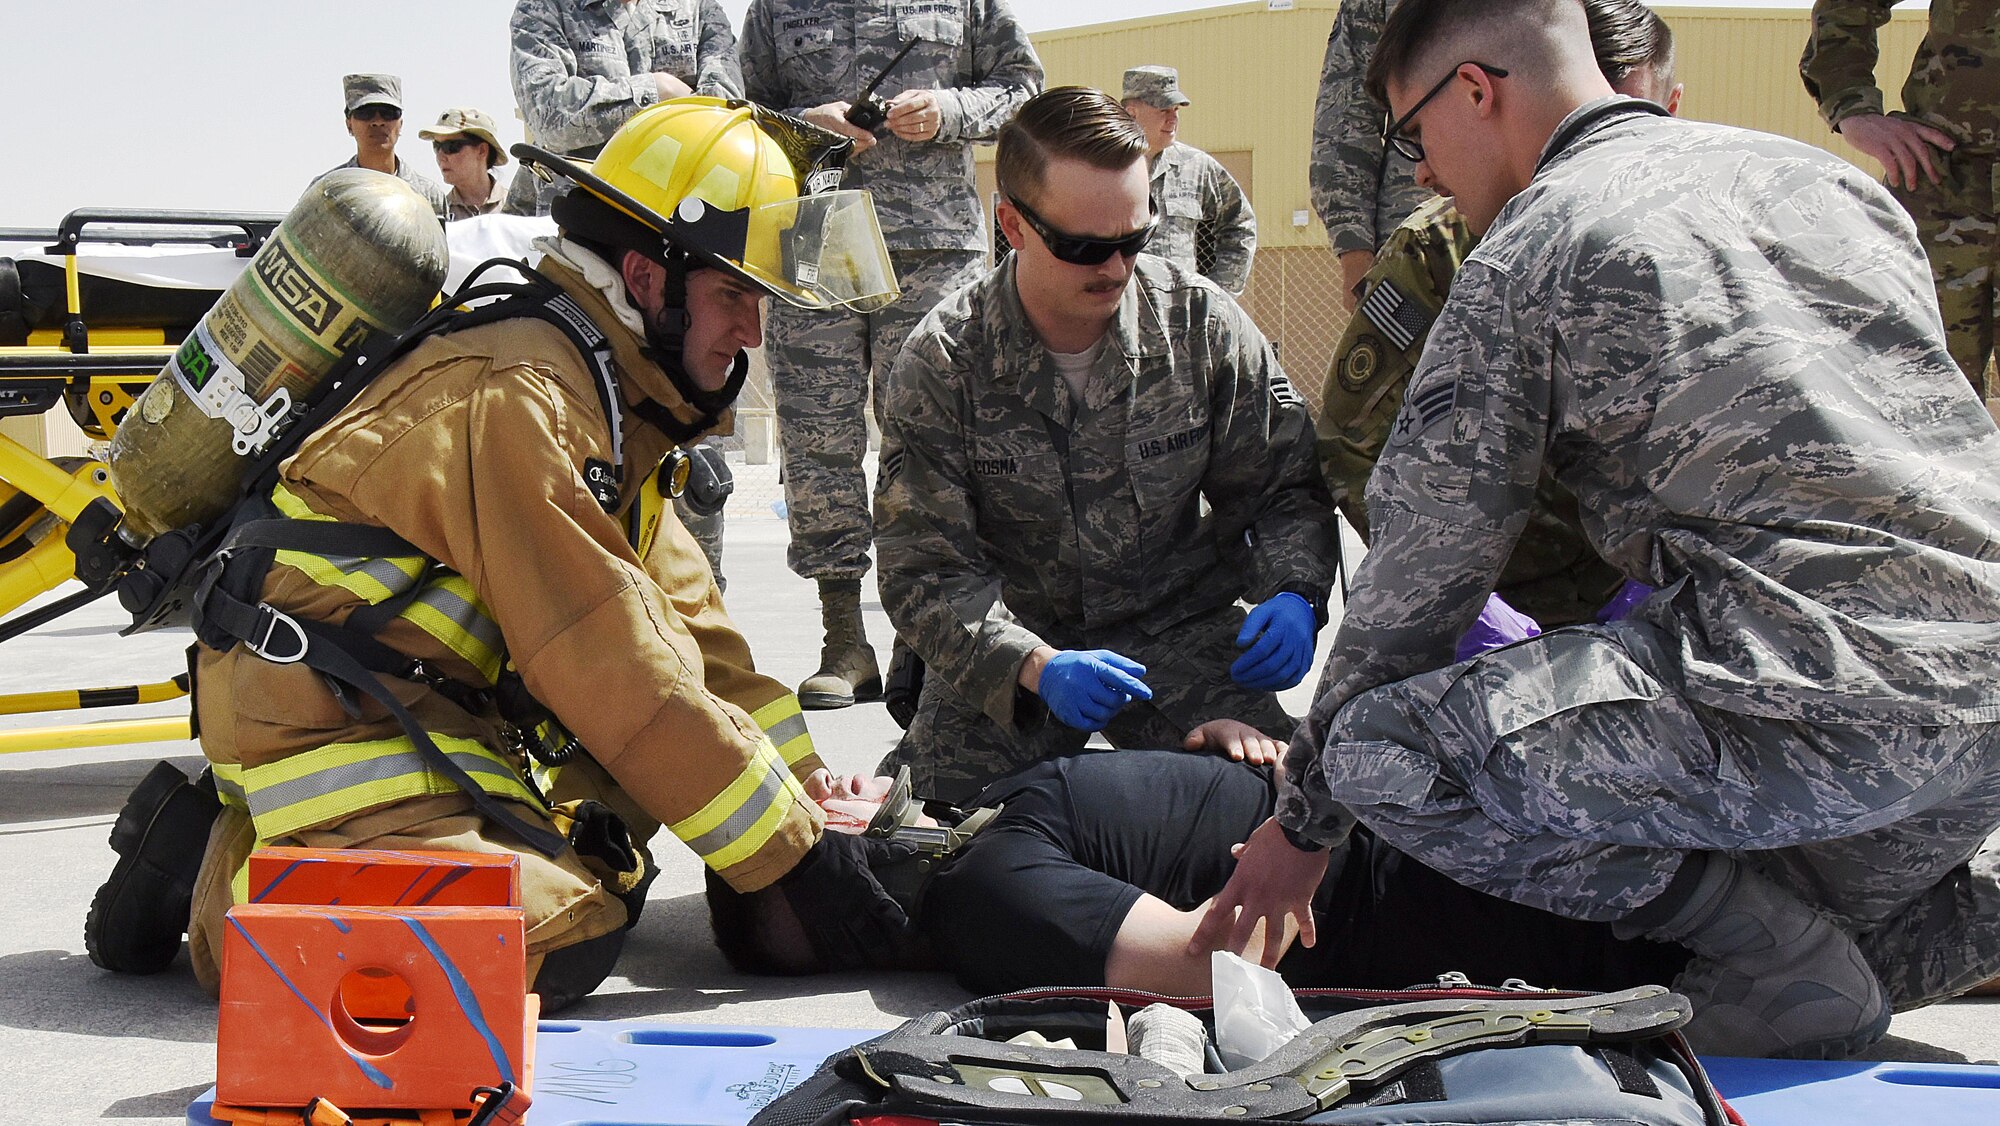 U.S. Air Force Airmen with the 379th Expeditionary Medical Group and firefighters with the 379th Expeditionary Civil Engineer Squadron lift a role player acting as a trauma patient at Al Udeid Air Base, Qatar, March 21, 2017. Scenarios like these are enacted to help first responders train and maintain their skillsets. (U.S. Air Force photo by Senior Airman Cynthia A. Innocenti)